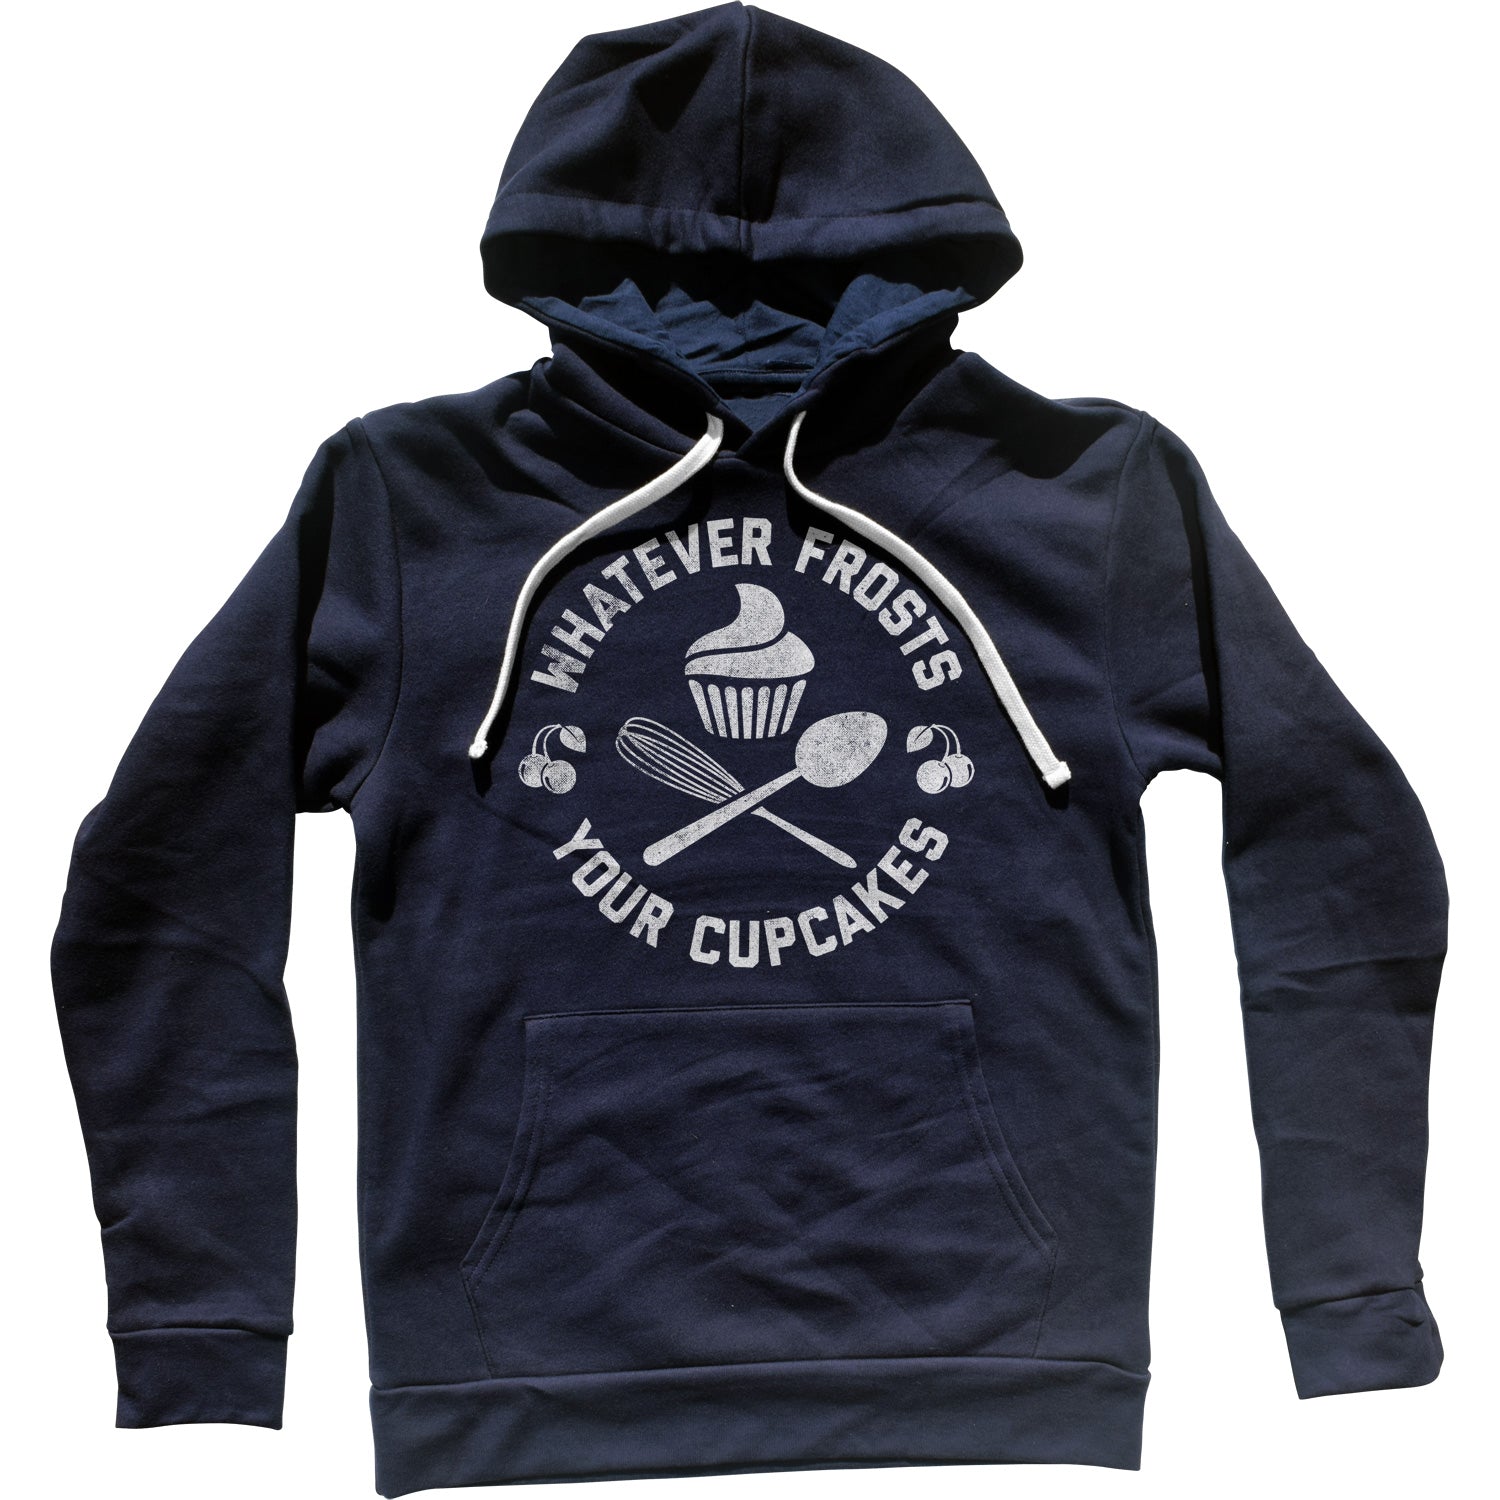 Whatever Frosts Your Cupcakes Unisex Hoodie